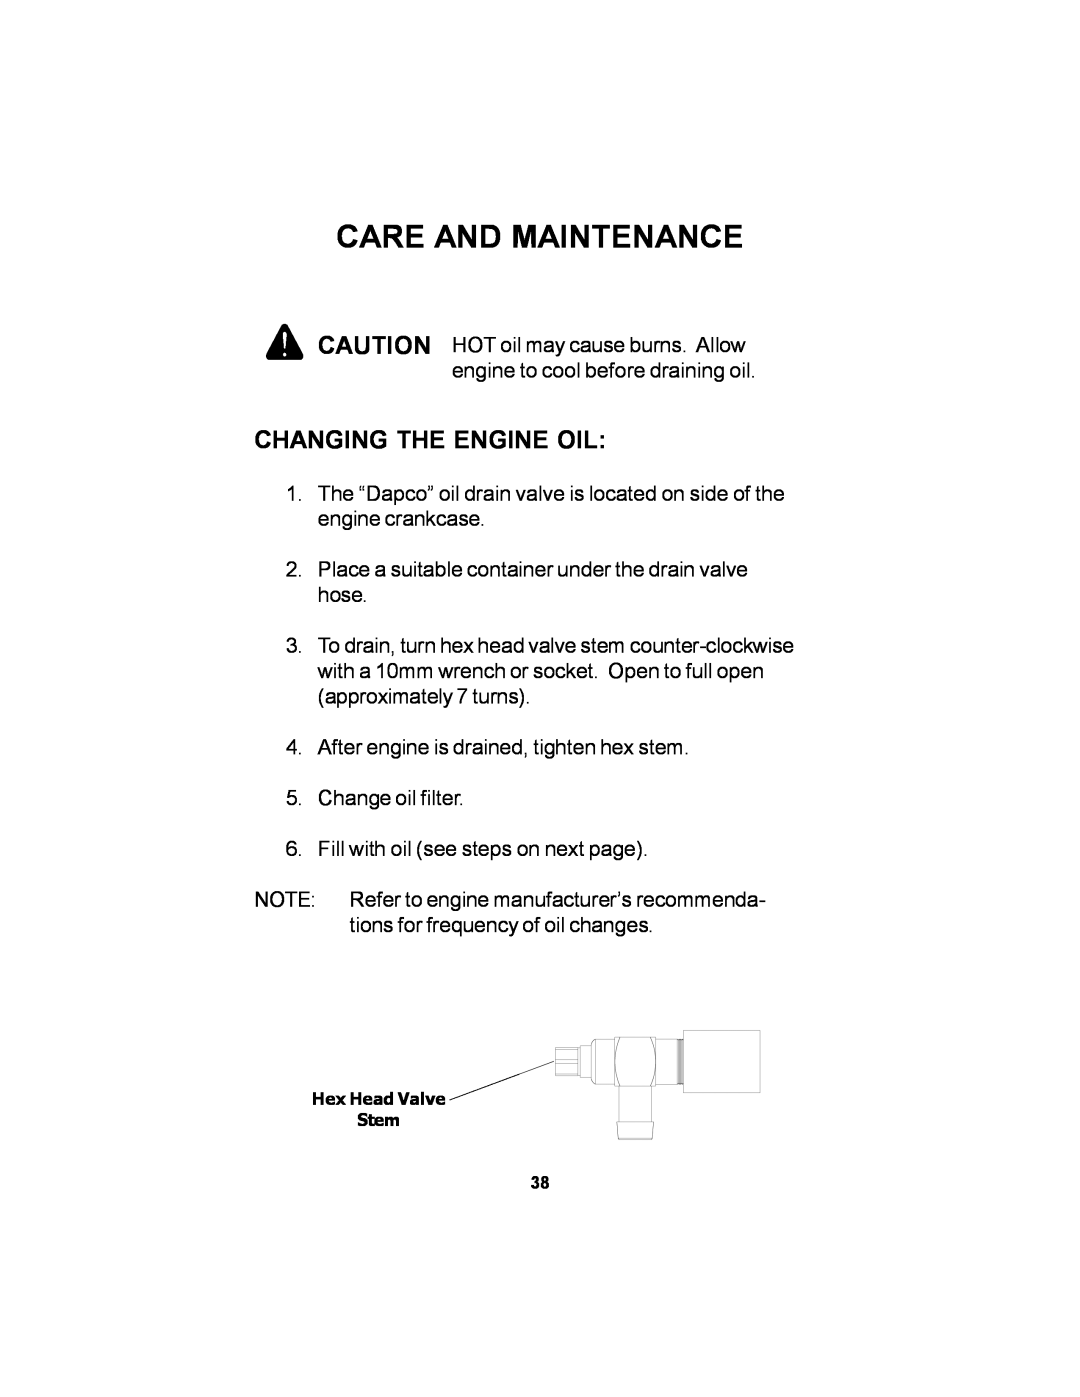 Dixon ELS 60 manual Changing The Engine Oil, Care And Maintenance 